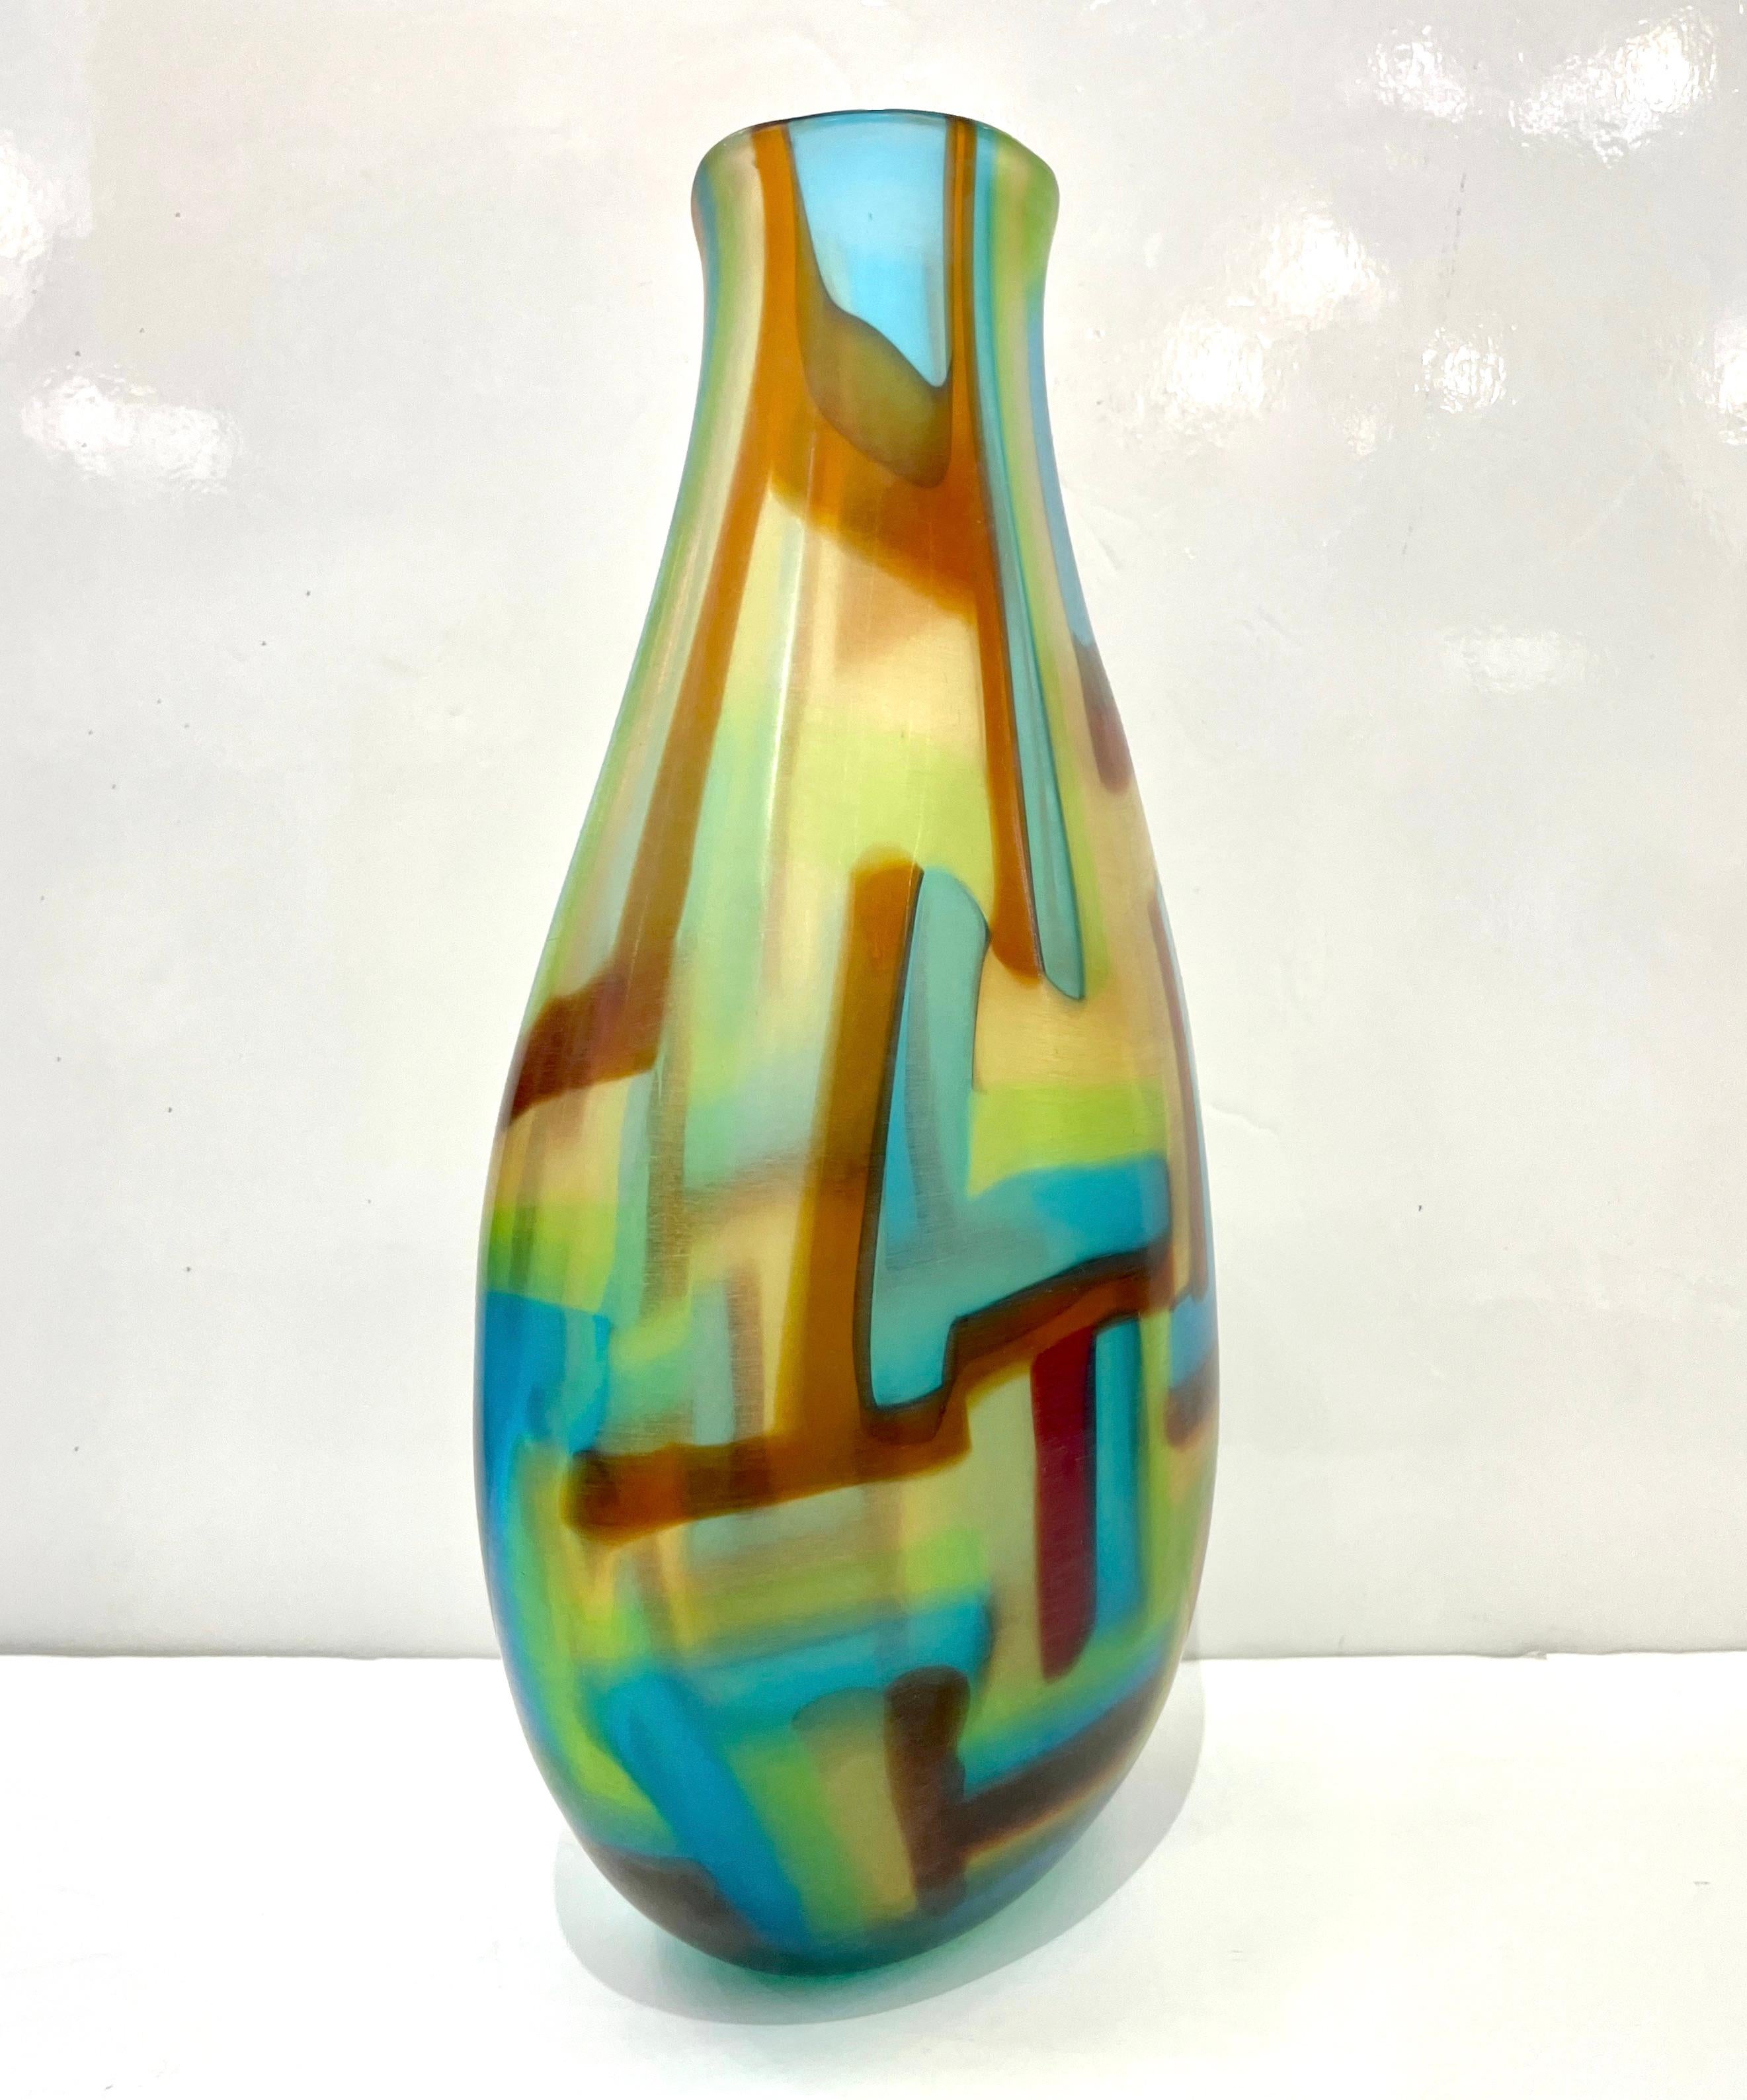 Afro Celotto Early 2000s Italian Turquoise Yellow Green Amber Murano Glass Vase For Sale 2